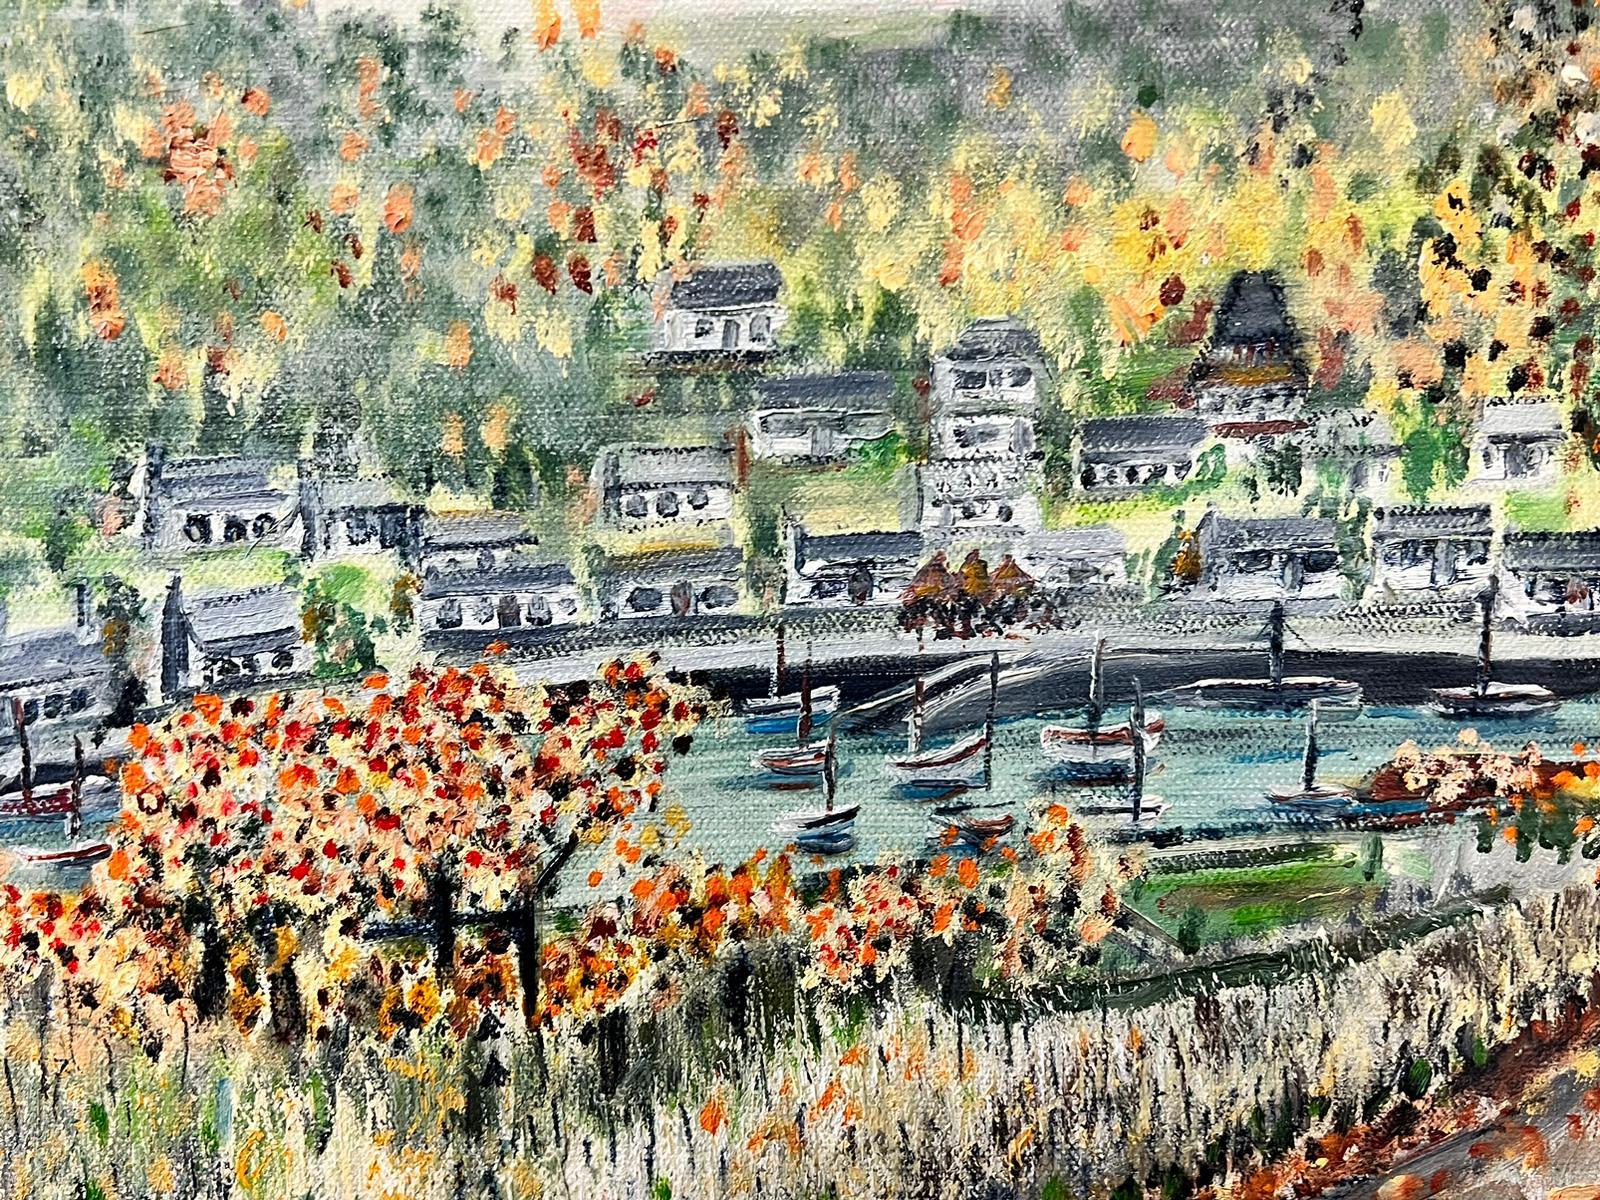 Pointillist Style River Landscape with Trees & Far Reaching View of Town - Abstract Painting by Contemporary British 